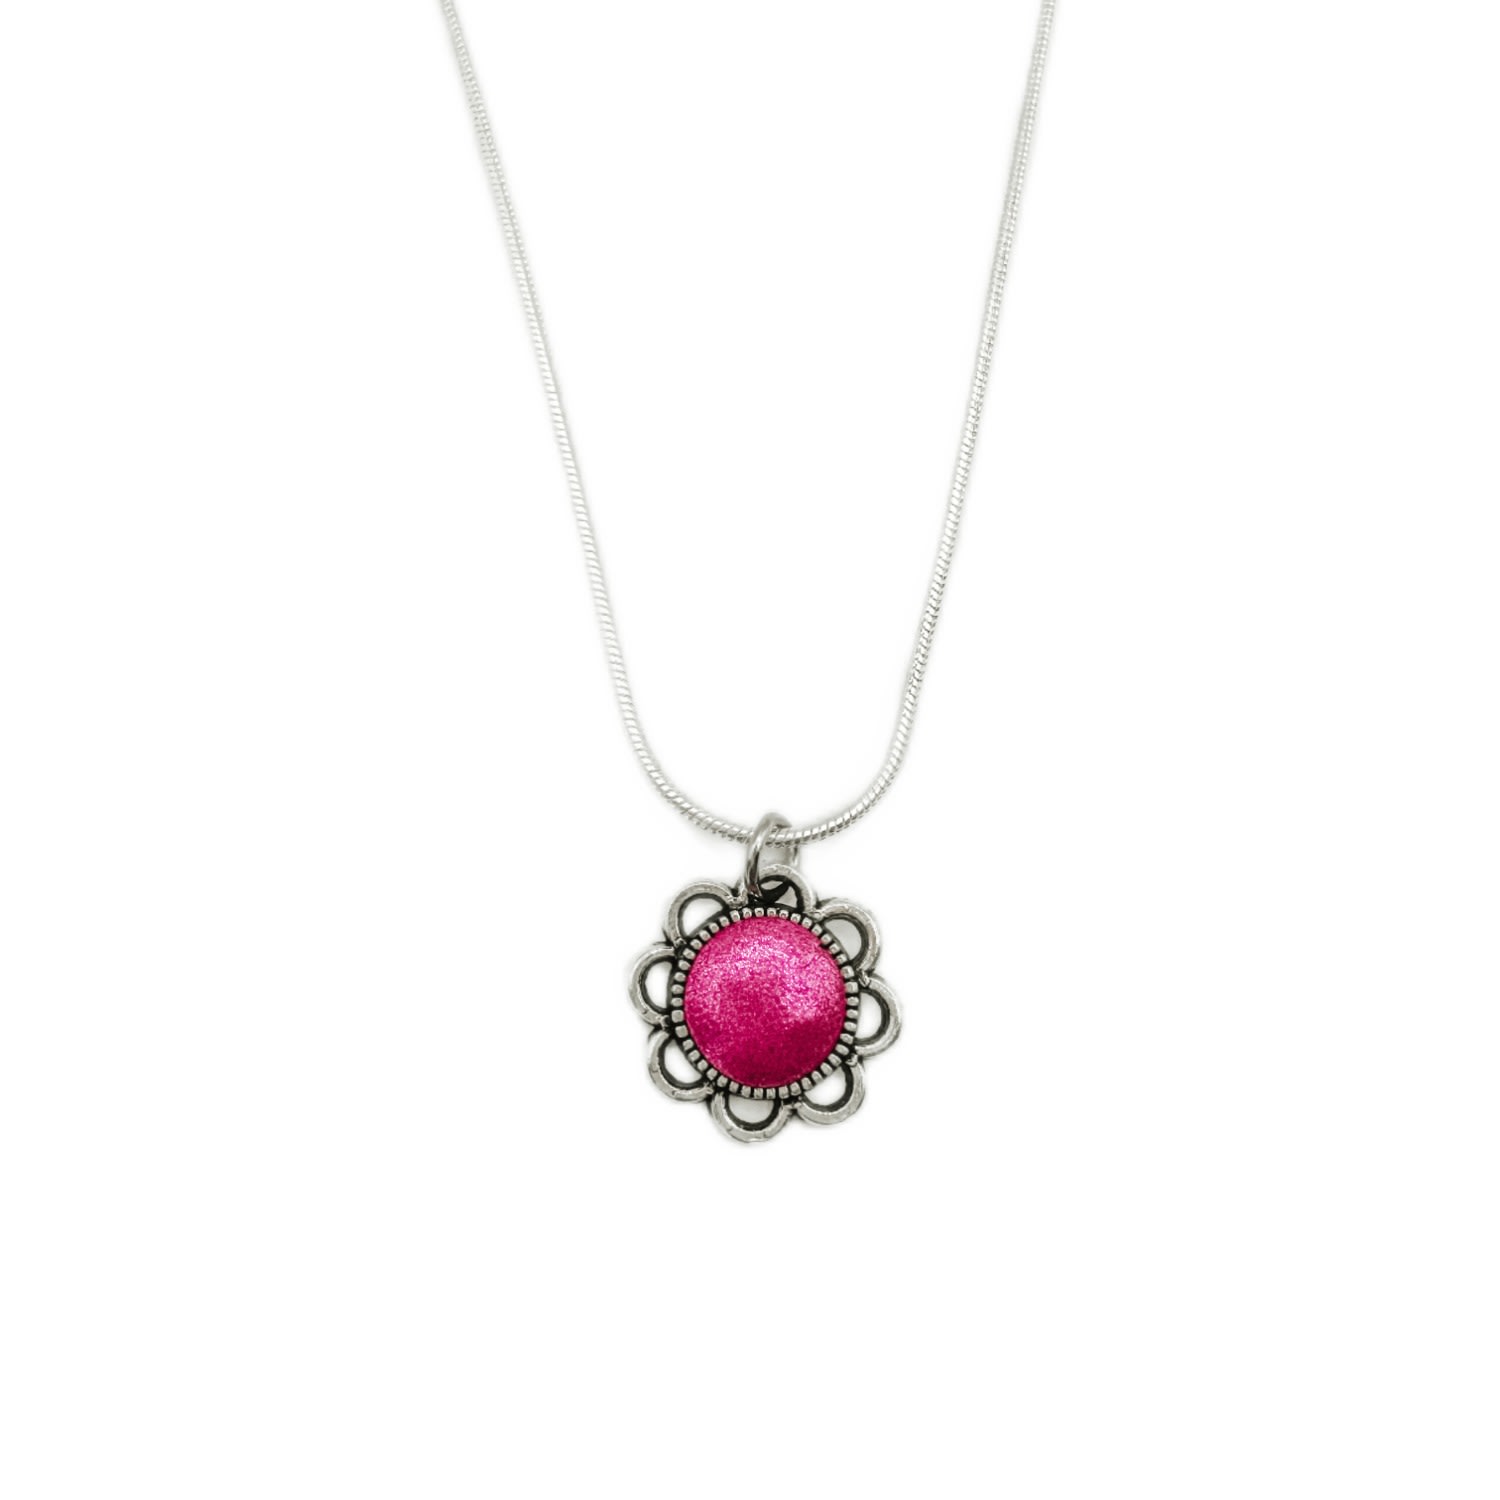 Women’s Pink / Purple Sterling Silver Bloom Necklace Babaloo Jewelry